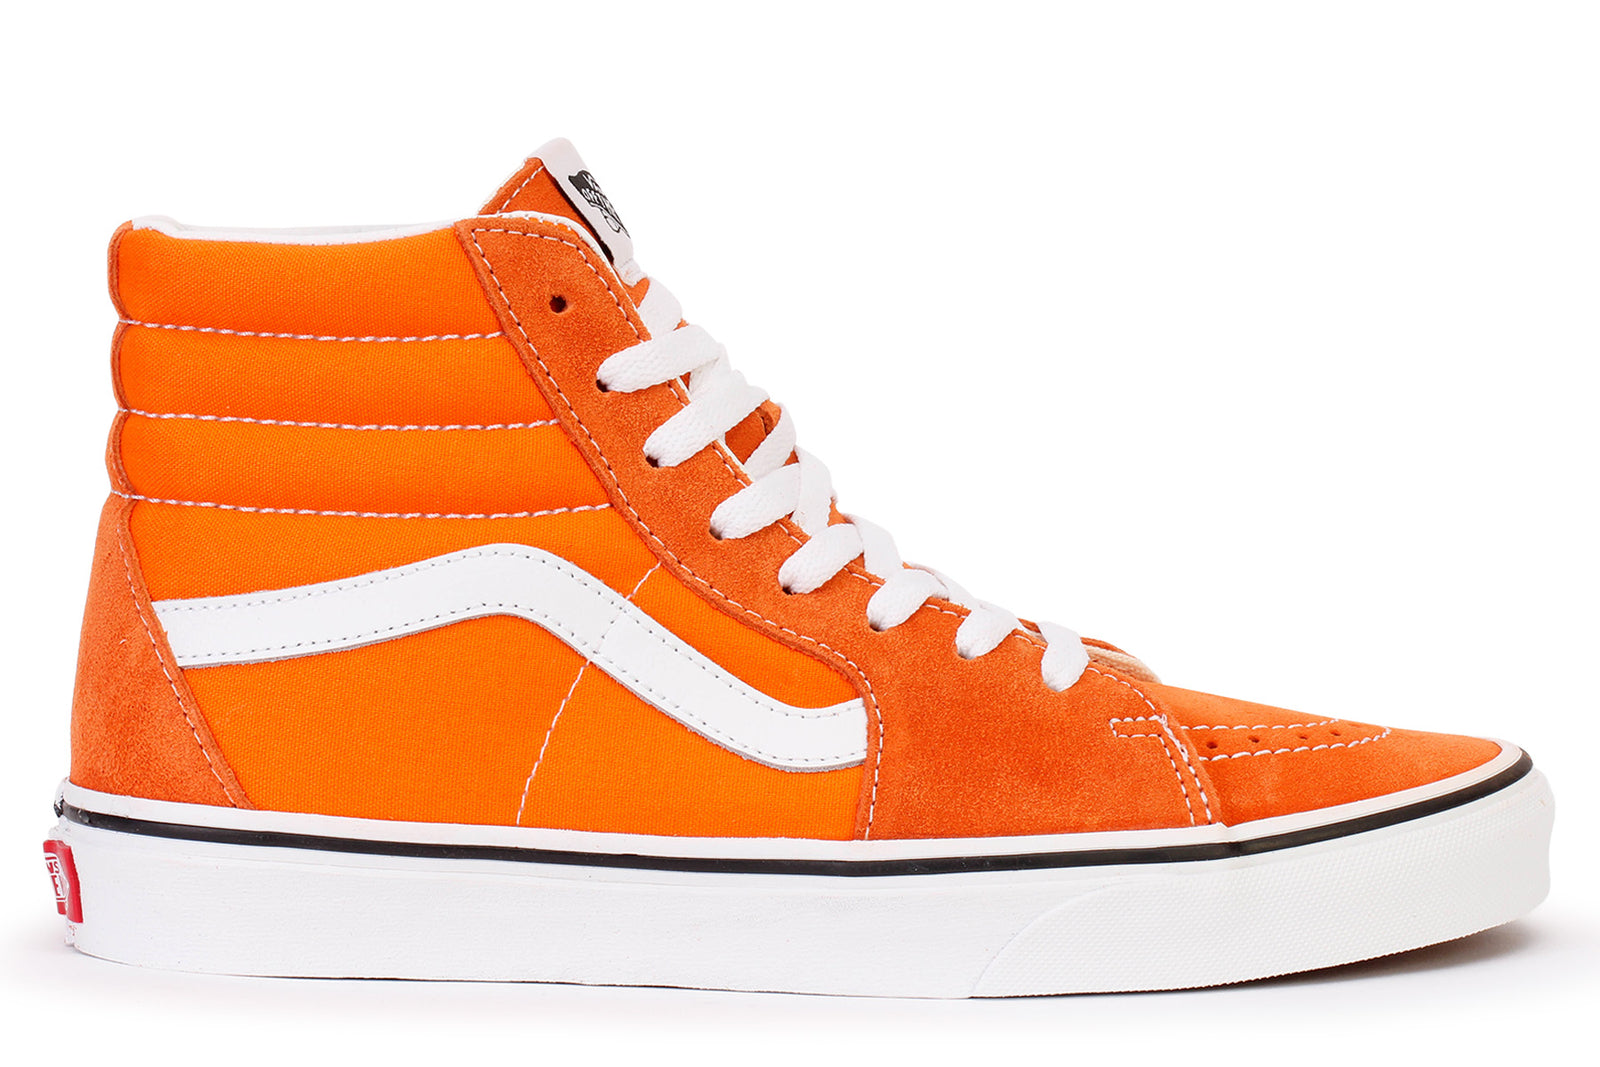 Vans is sprucing up some classics in the new Tiger Patchwork